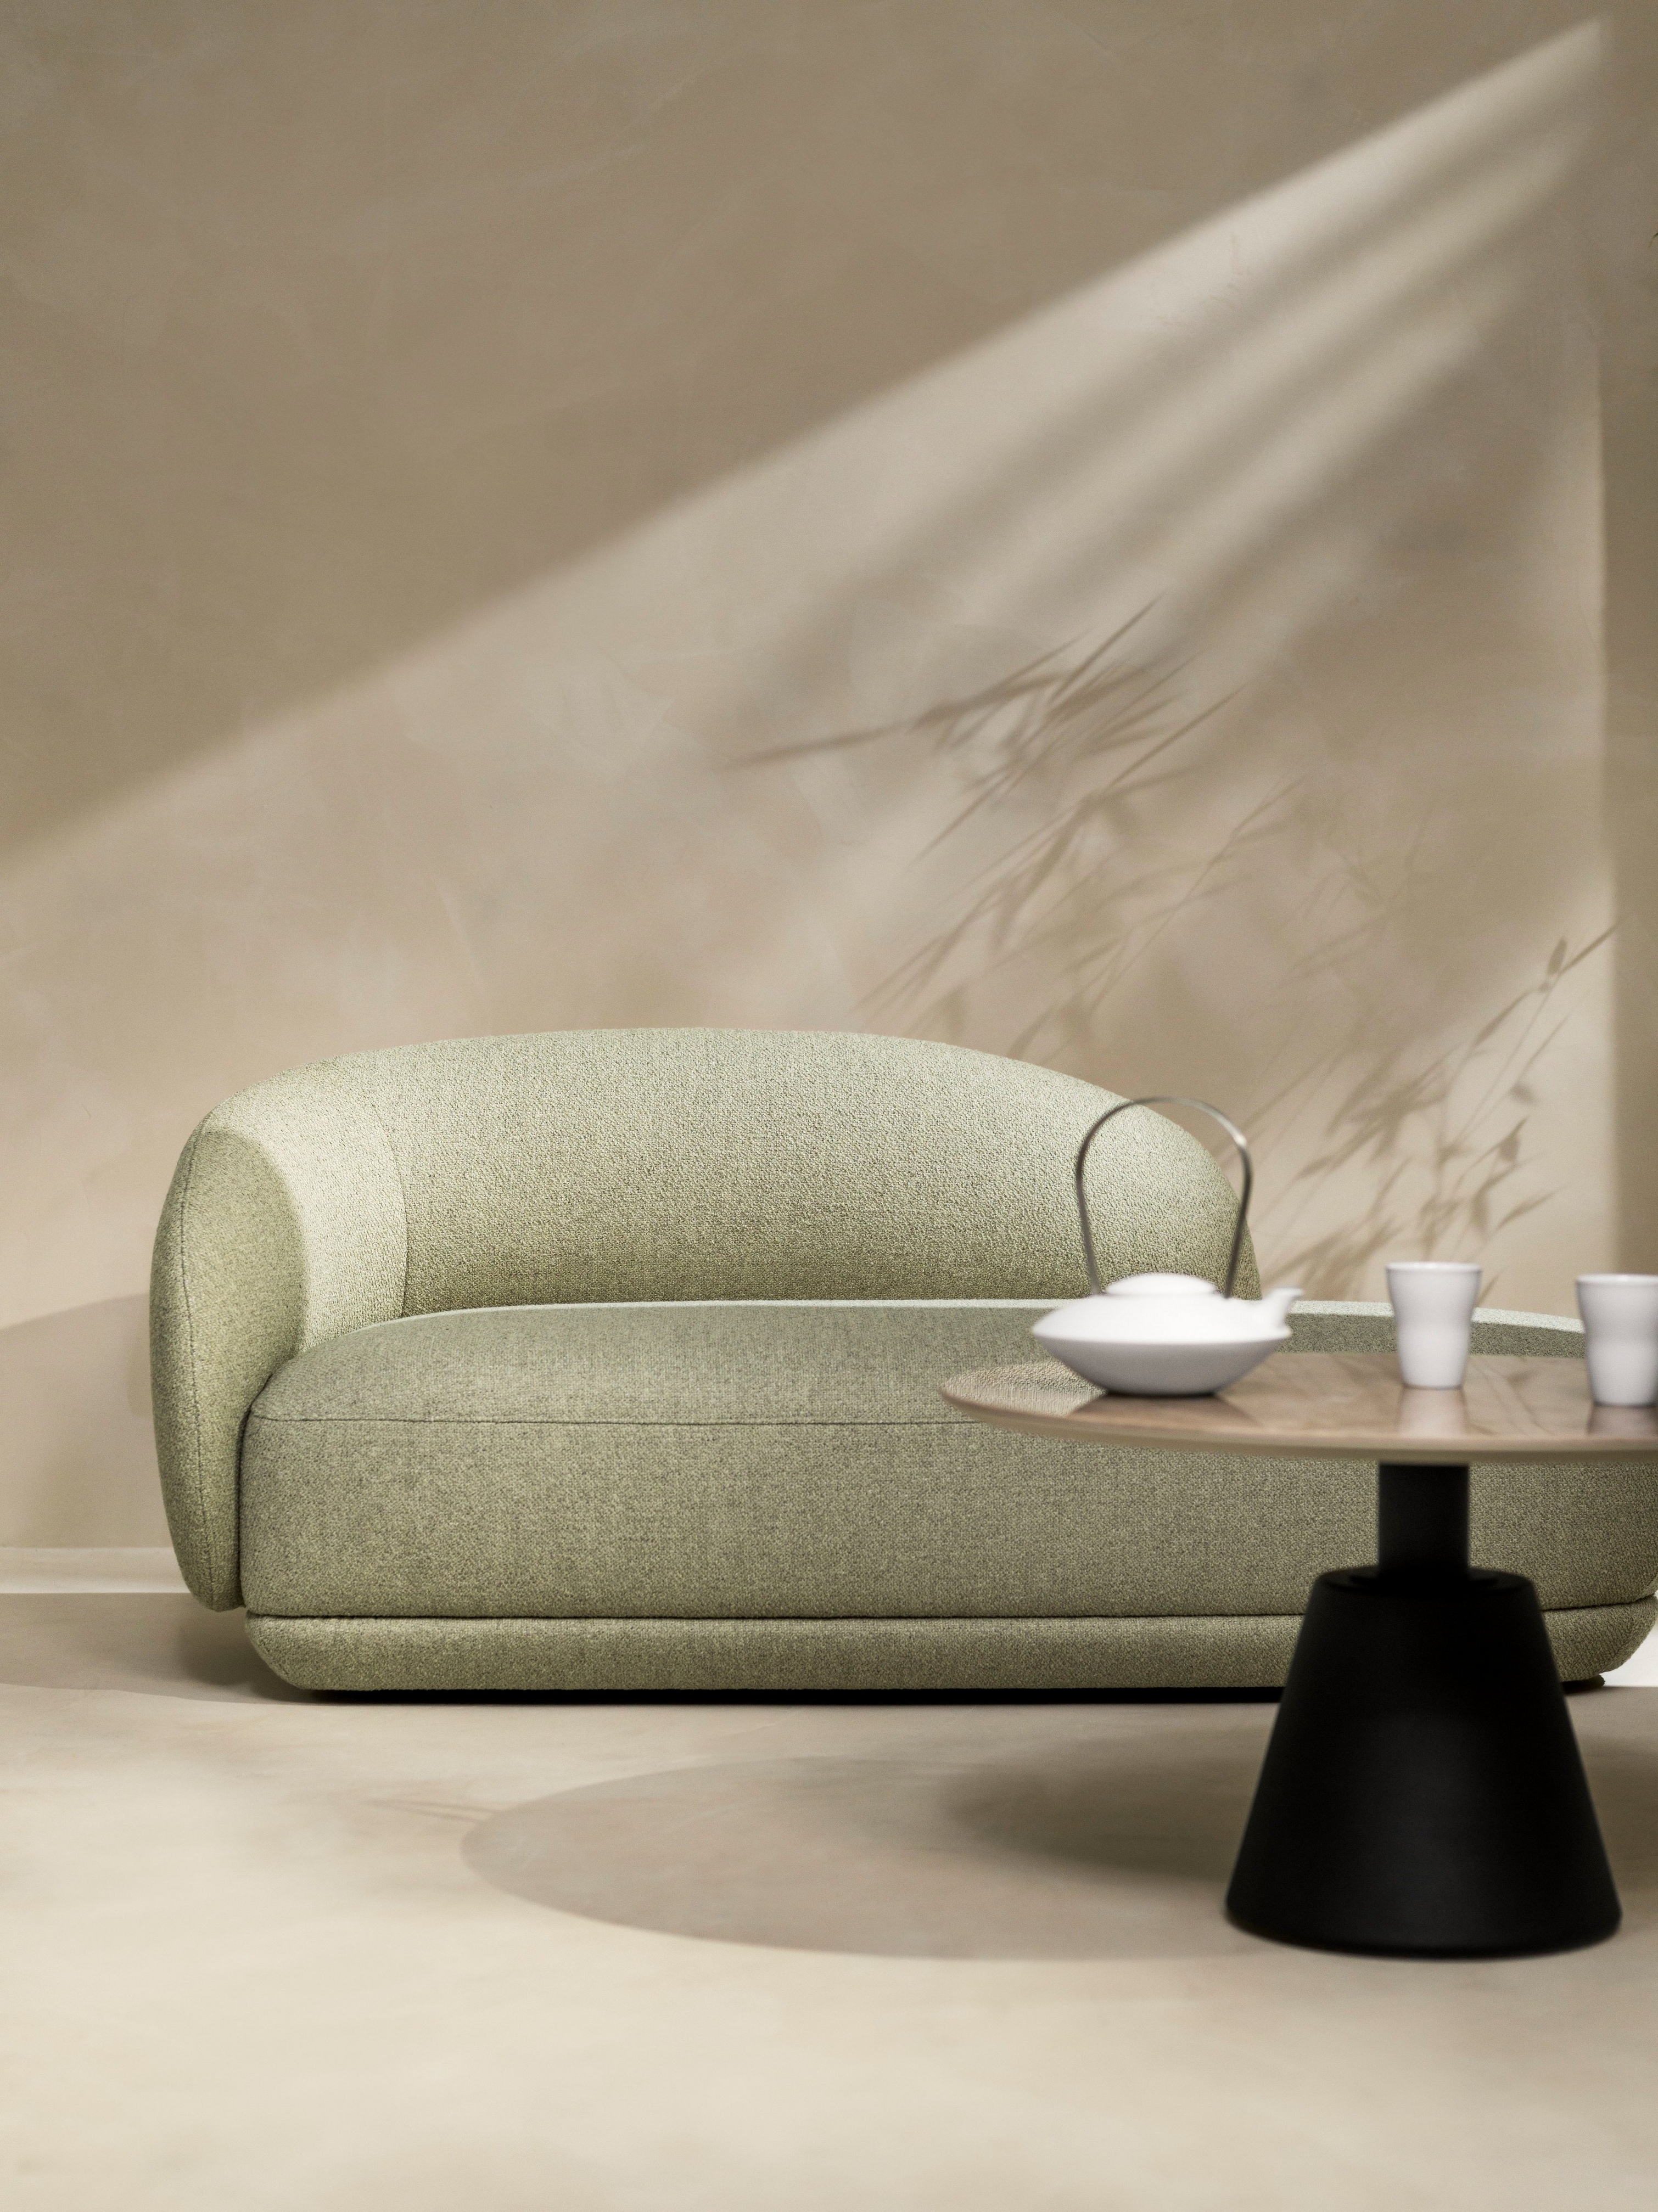 Peaceful living space with the Bolzano chaise longue in light green Lazio fabric